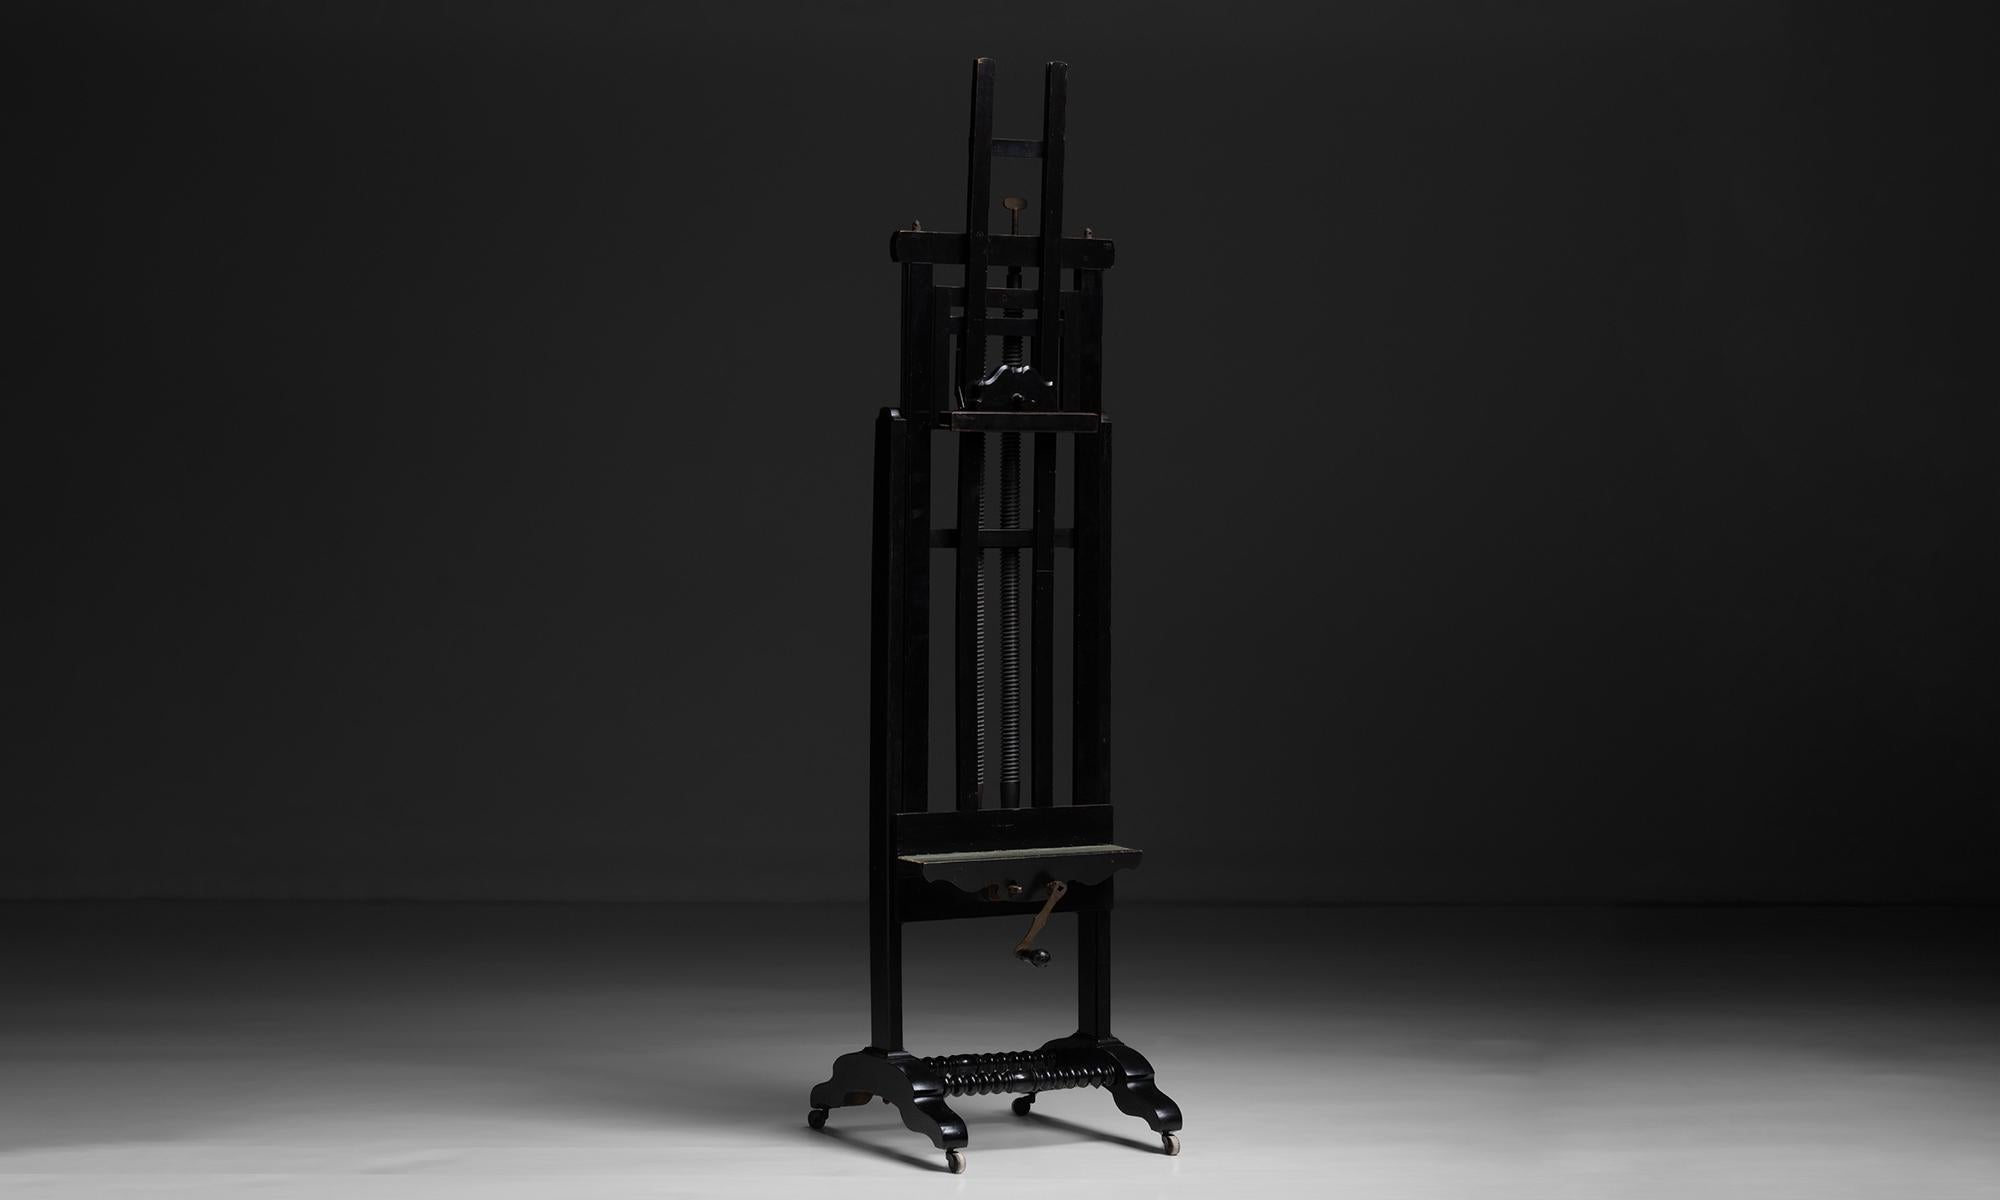 ebonized Painter's Easel

England circa 1900

Original finish, mechanisms for raising, lowering, and tilting.

20.25”w x 23.5”d x 83”h (as shown, adjustable).